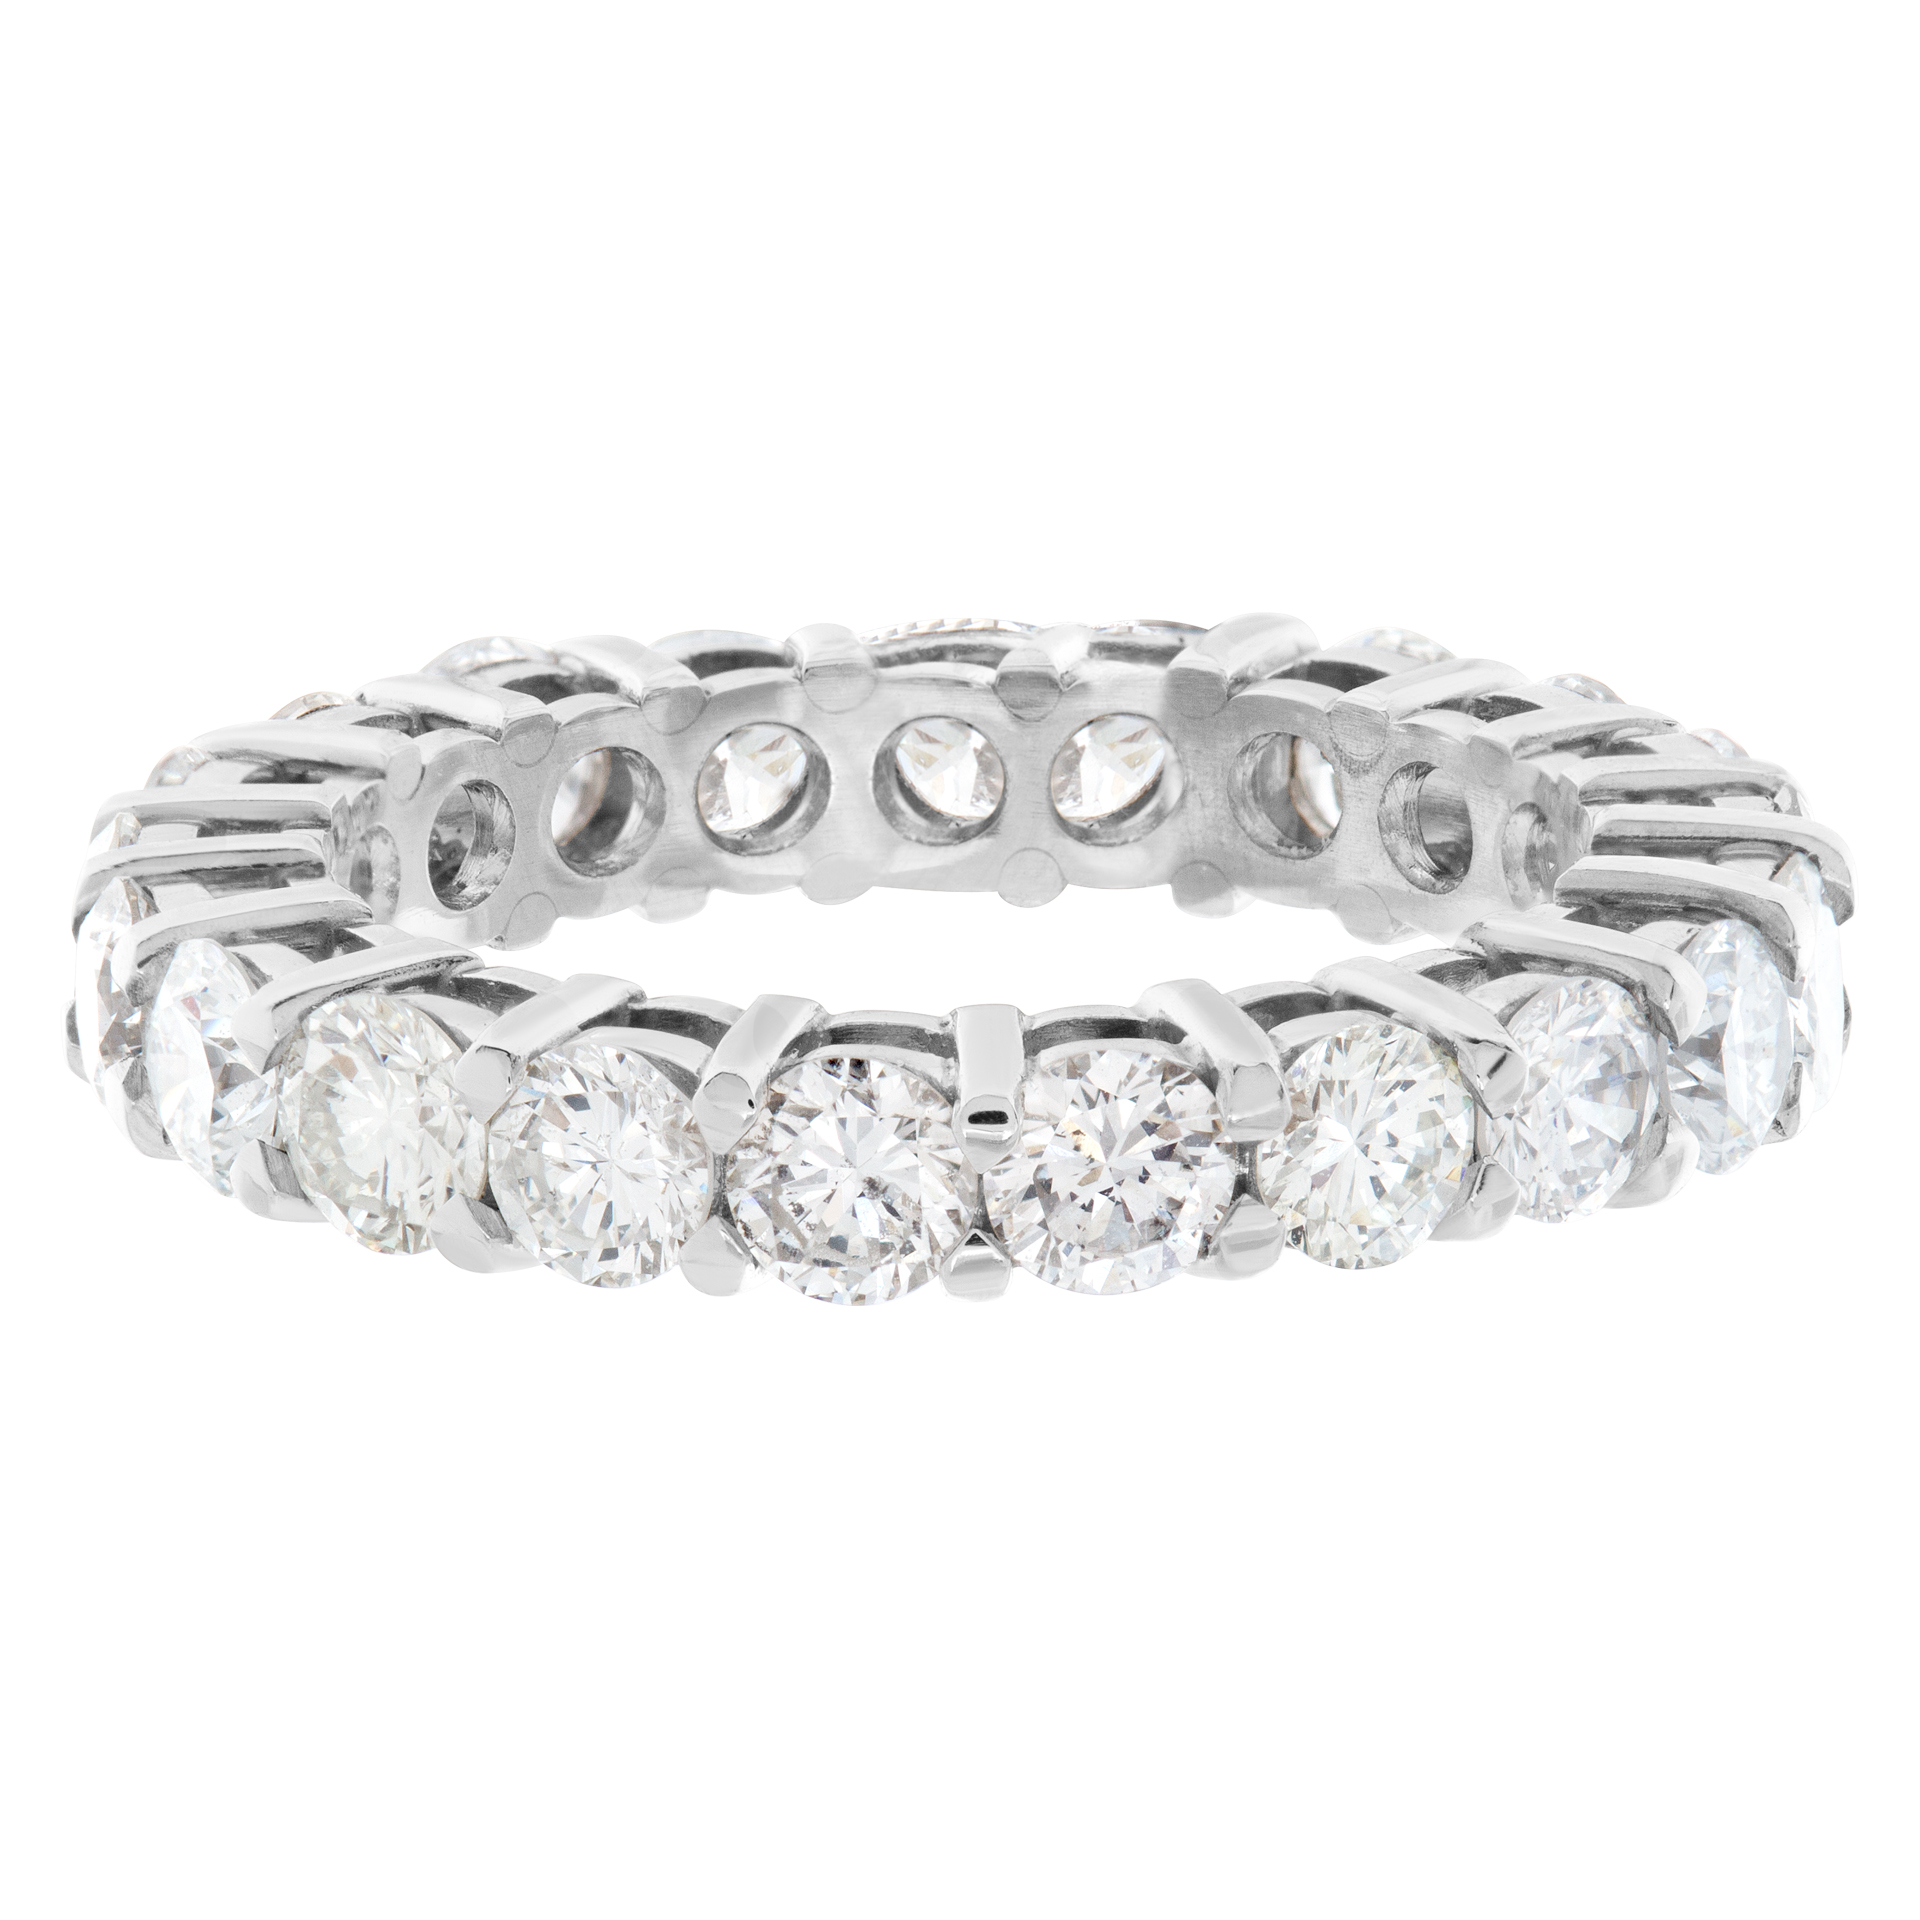 Round brilliant cut Diamonds eternity band in Platinum. Round brilliant cut diamonds total approx. weight: 2.72 carats. Size 5.75 image 1